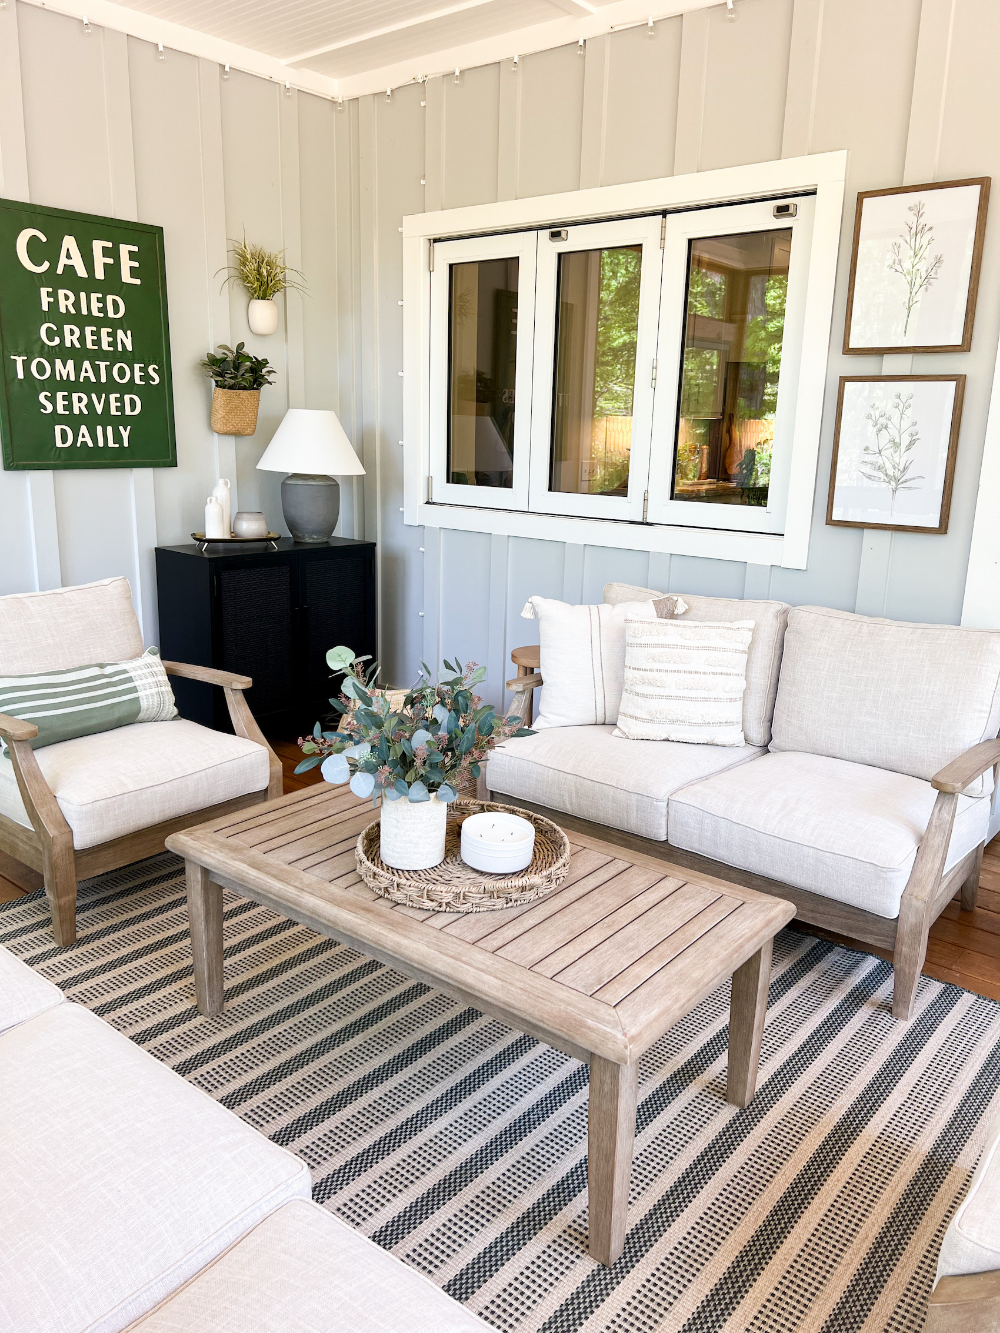 Creating a Cozy and Inviting Screened-In Back Porch: Inspirational Ideas and Designs